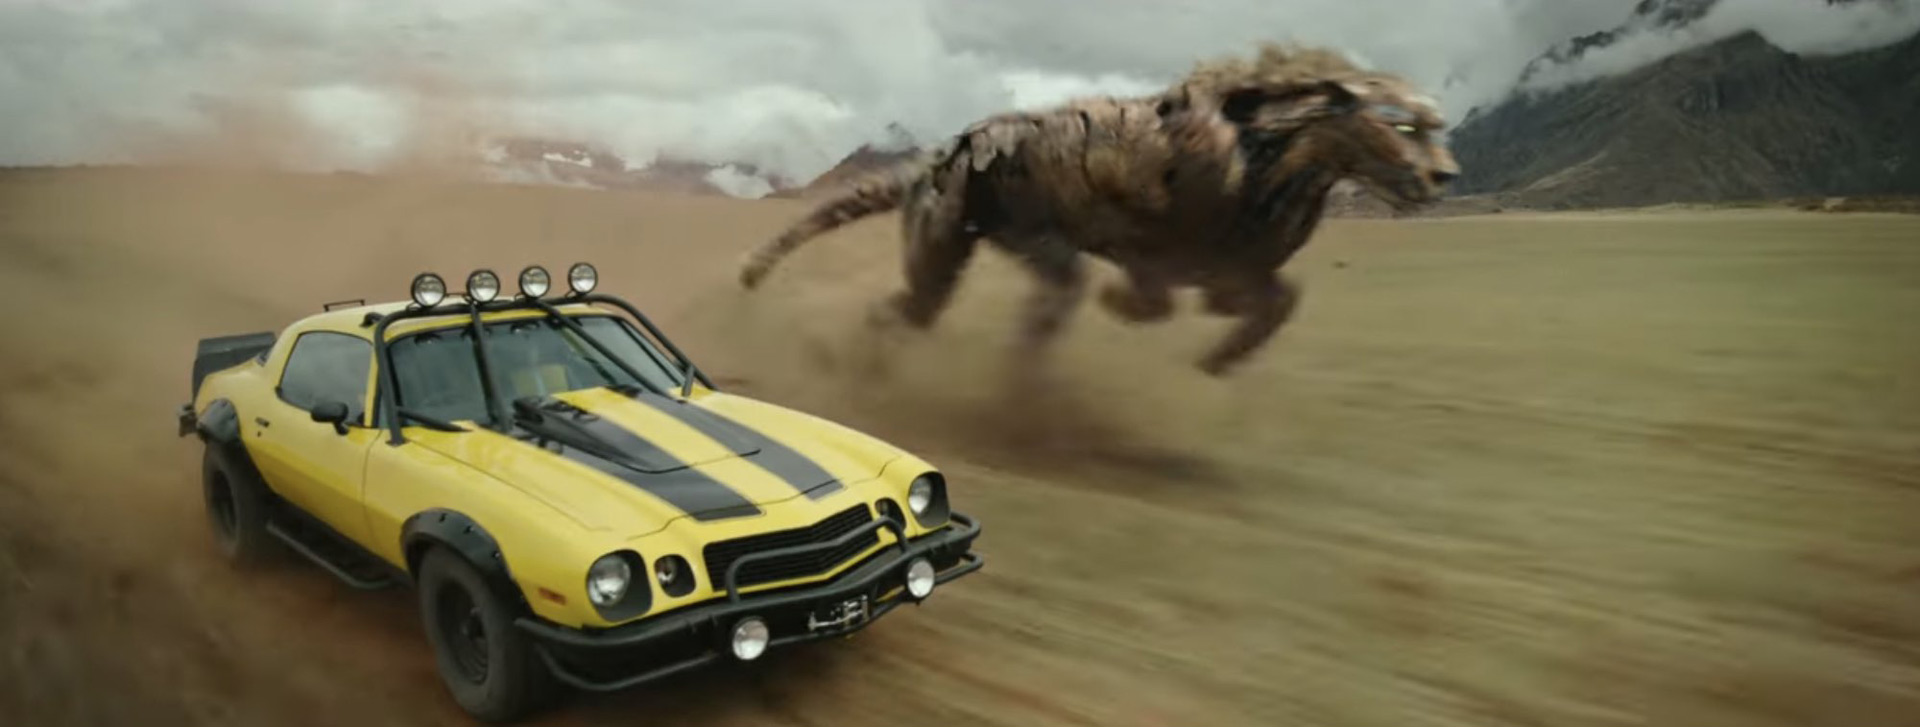 The Rise of the Beasts trailer is packed with vehicle